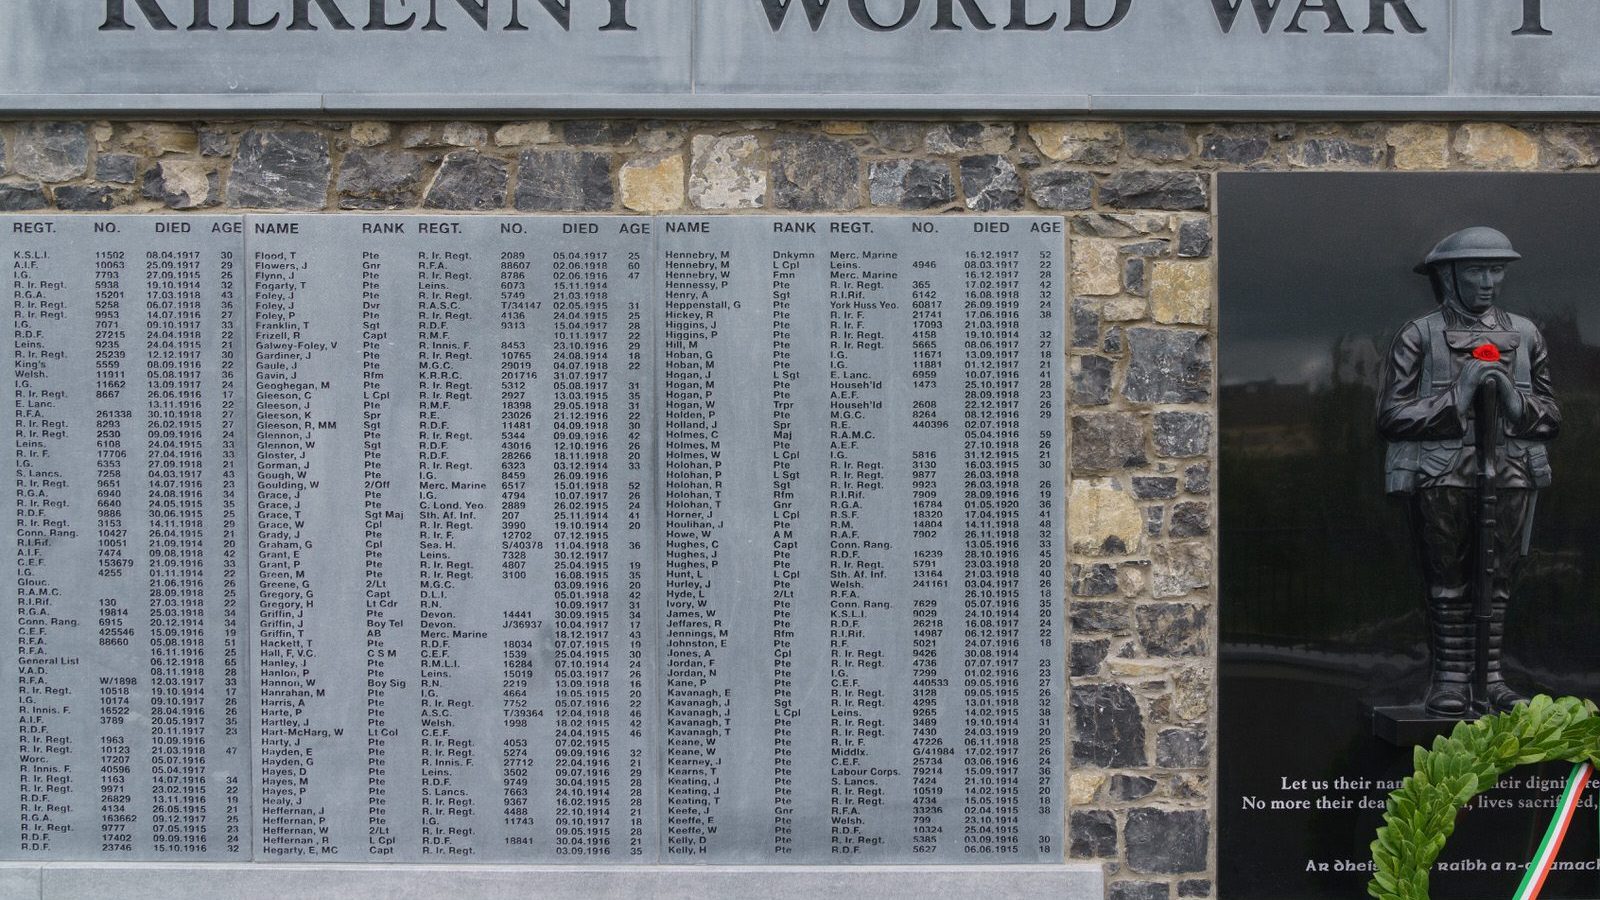 THE FIRST WORLD WAR MEMORIAL UNVEILED IN 2018 AT THE PEACE PARK IN KILKENNY [ALSO THE STORY OF 14 YEAR OLD THOMAS WOODGATE]-226810-1